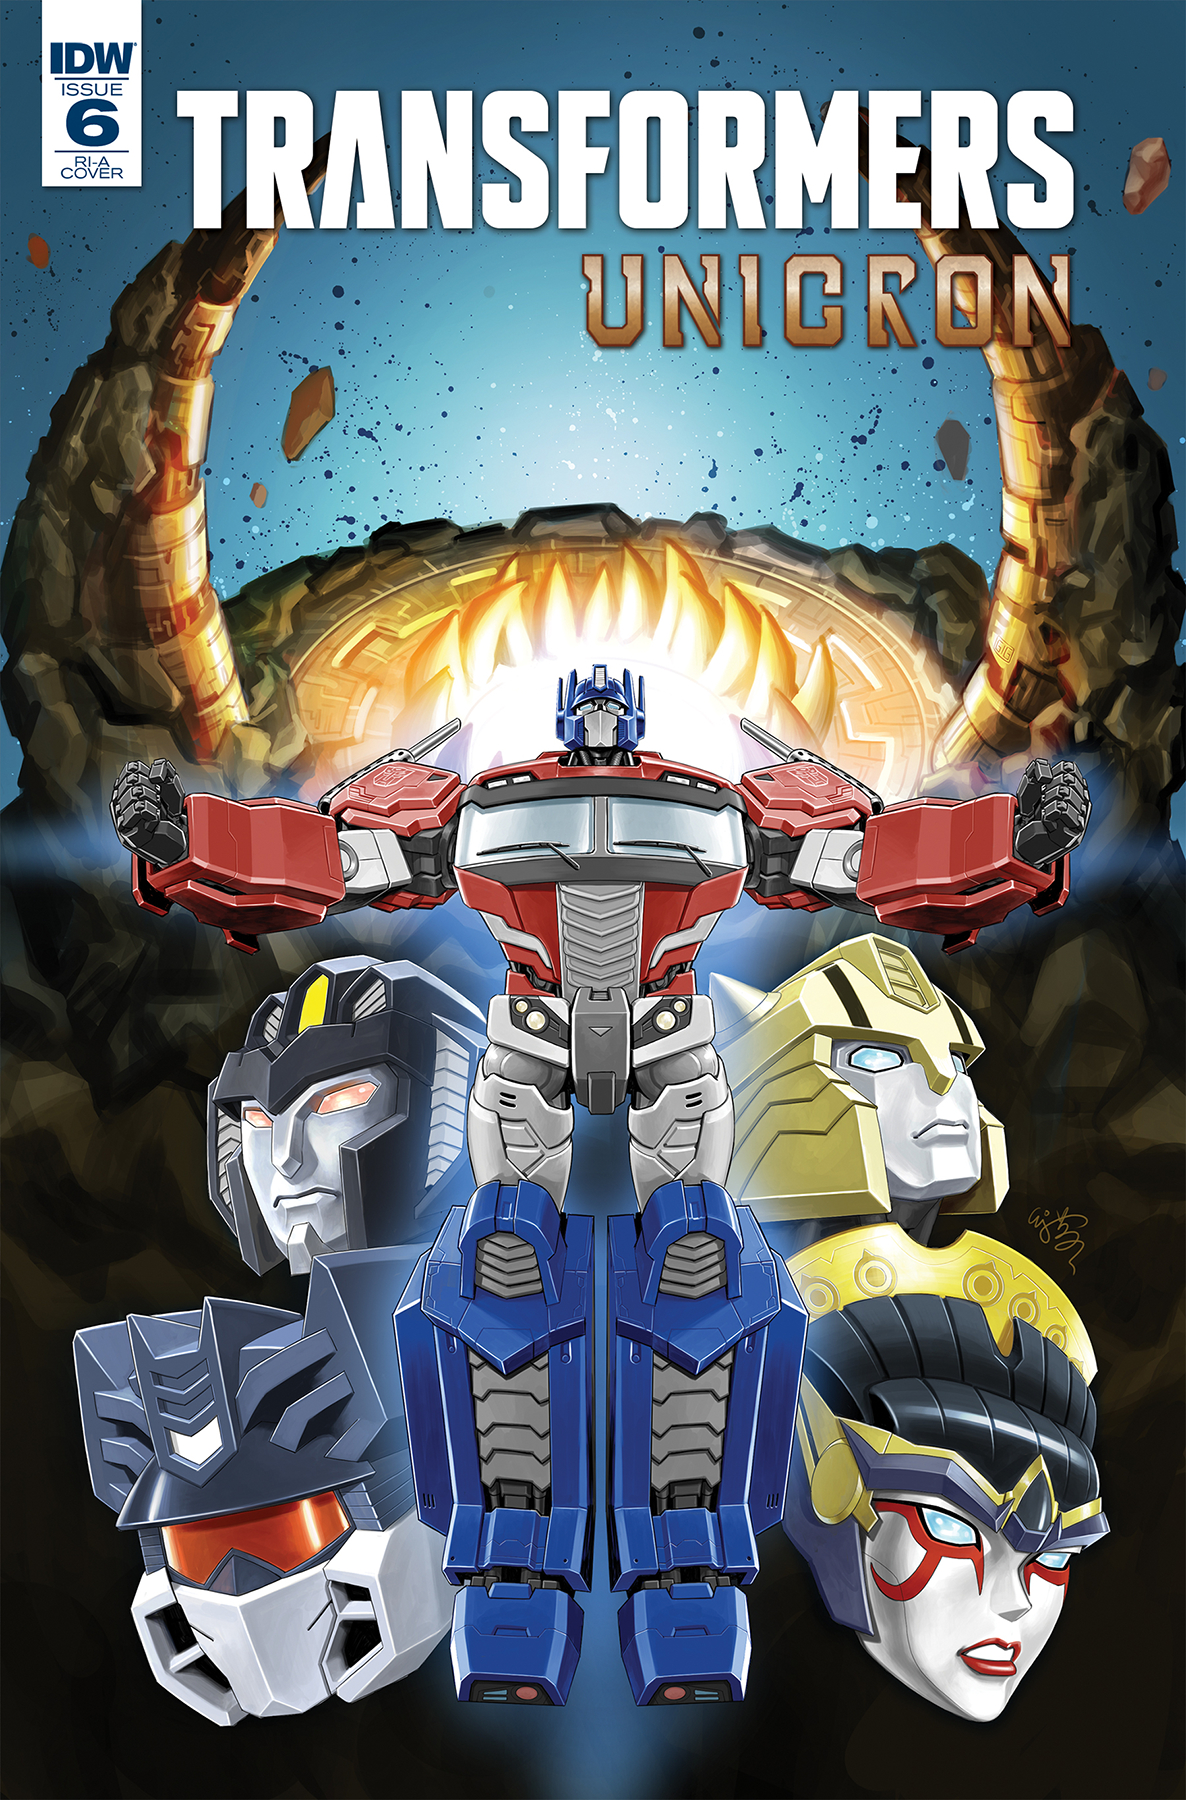 EJ Su Cover for IDW Transformers: Unicron #6 Revealed